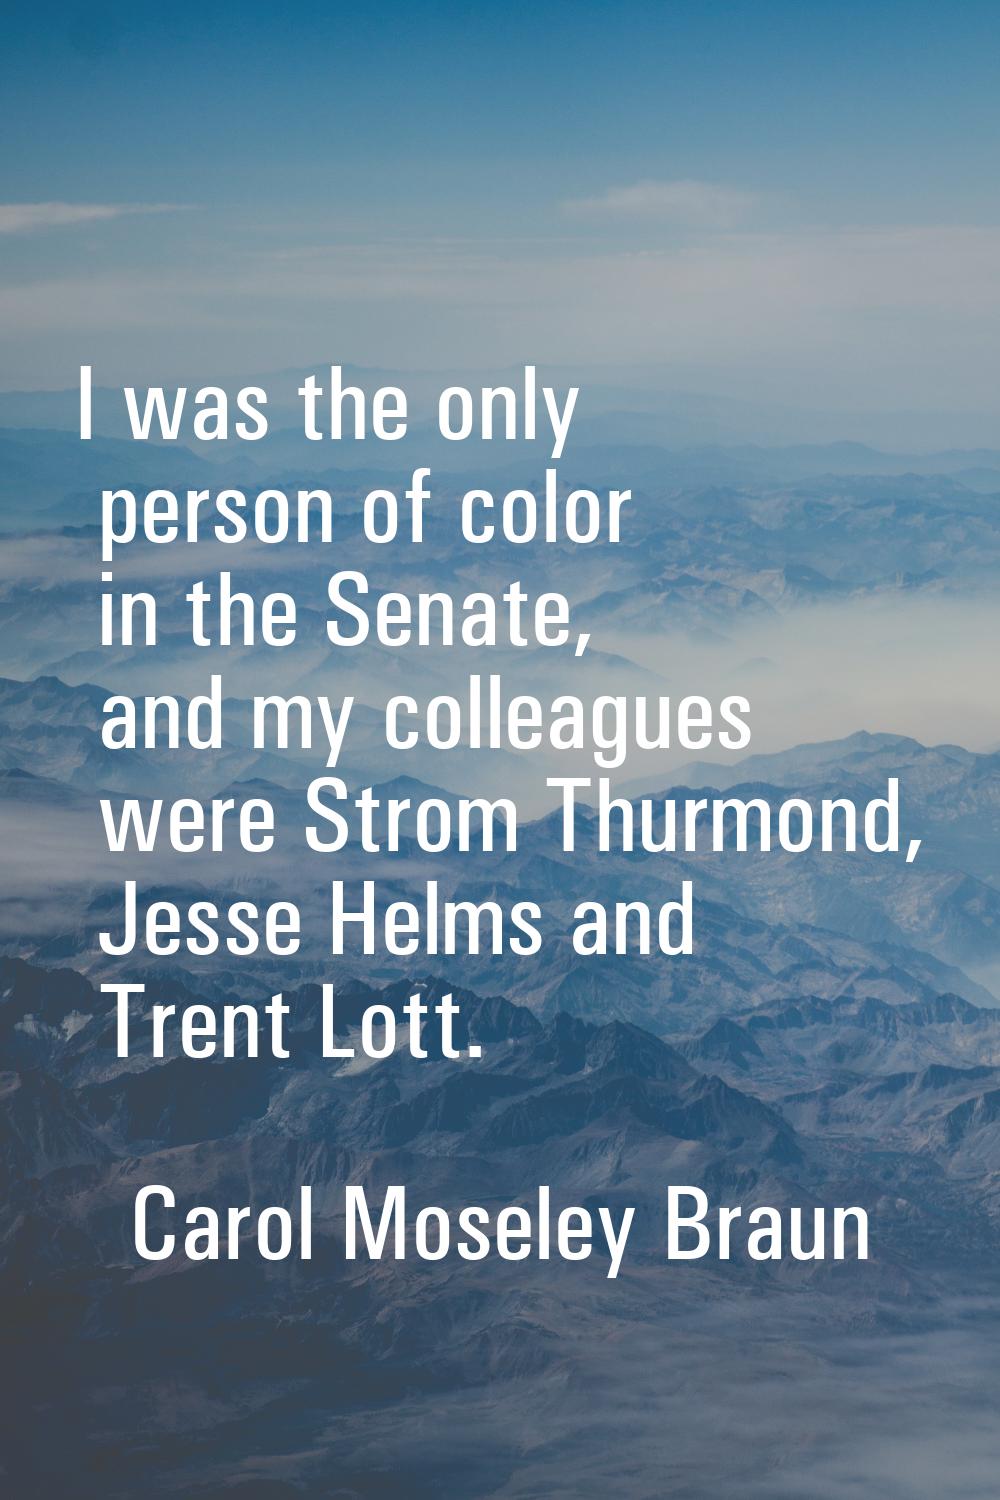 I was the only person of color in the Senate, and my colleagues were Strom Thurmond, Jesse Helms an